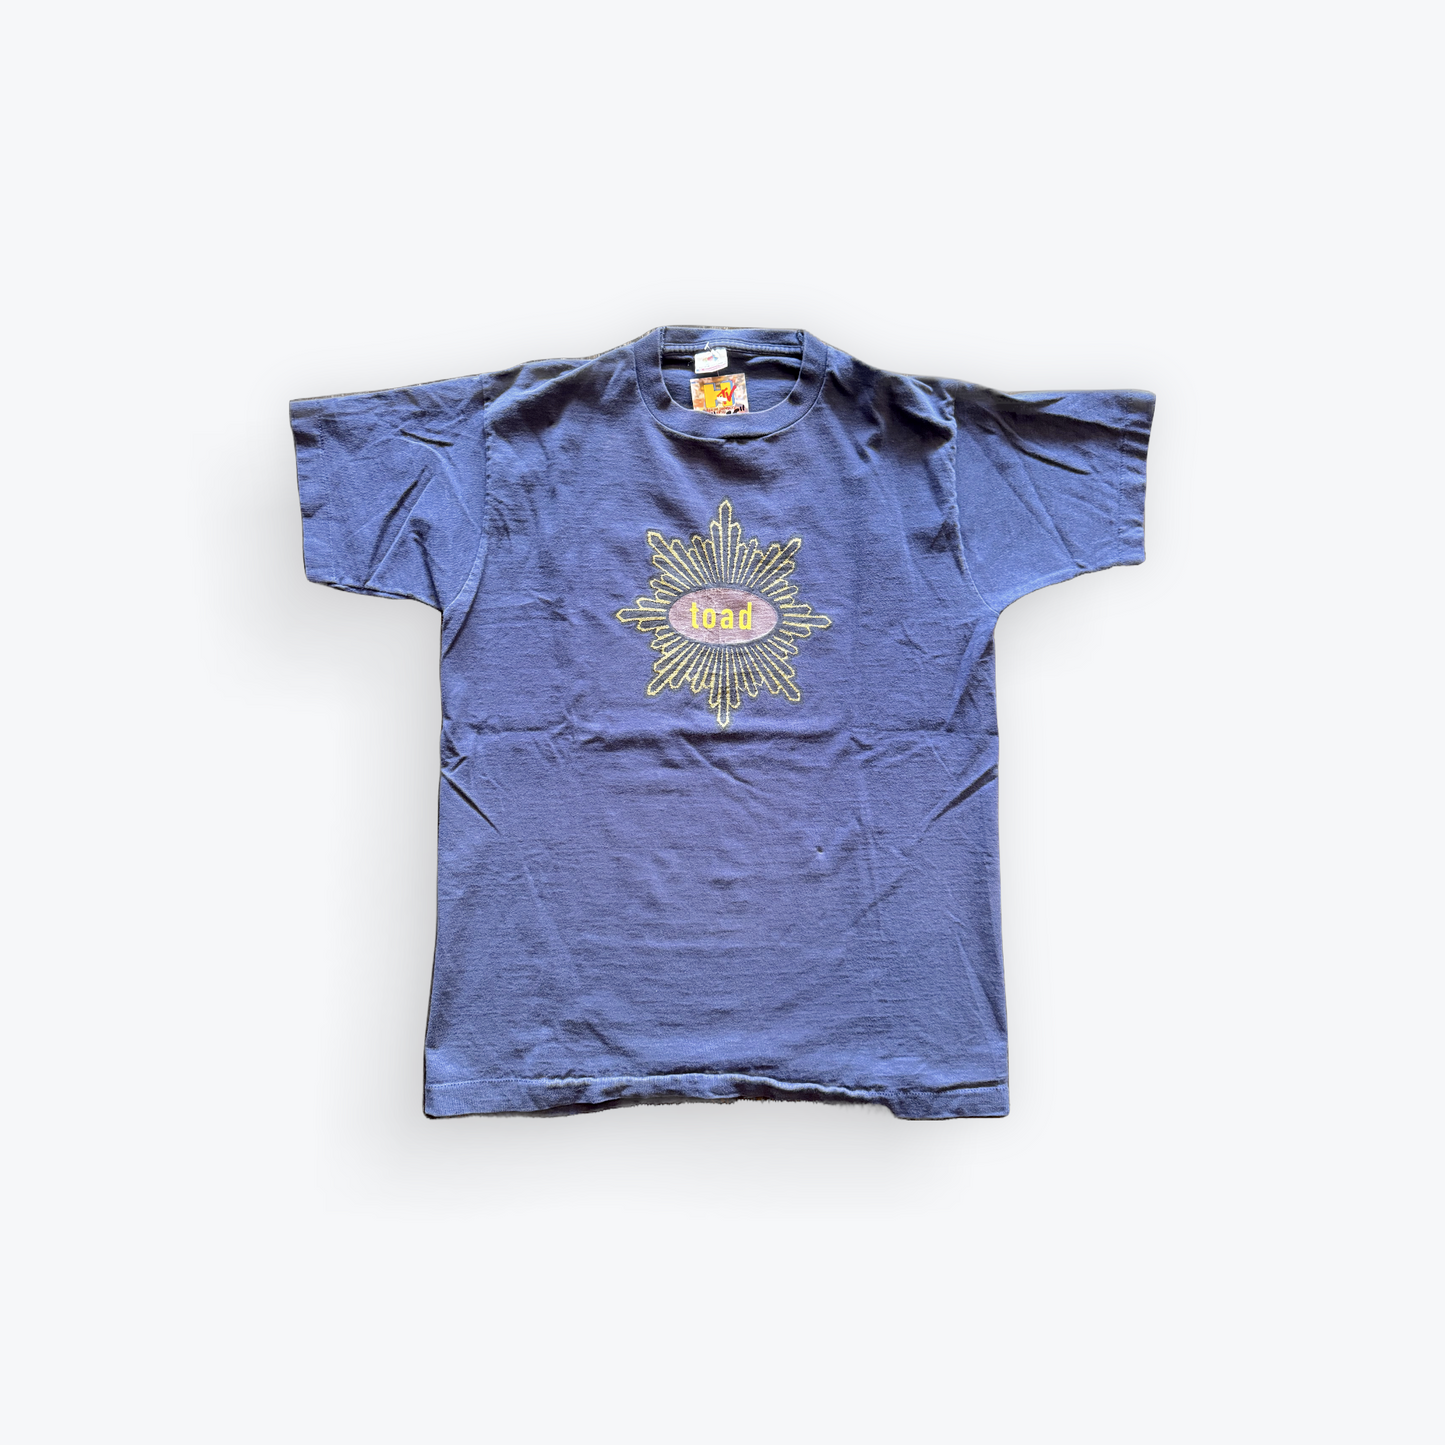 Toad "The Wet Sprocket" Band Tee